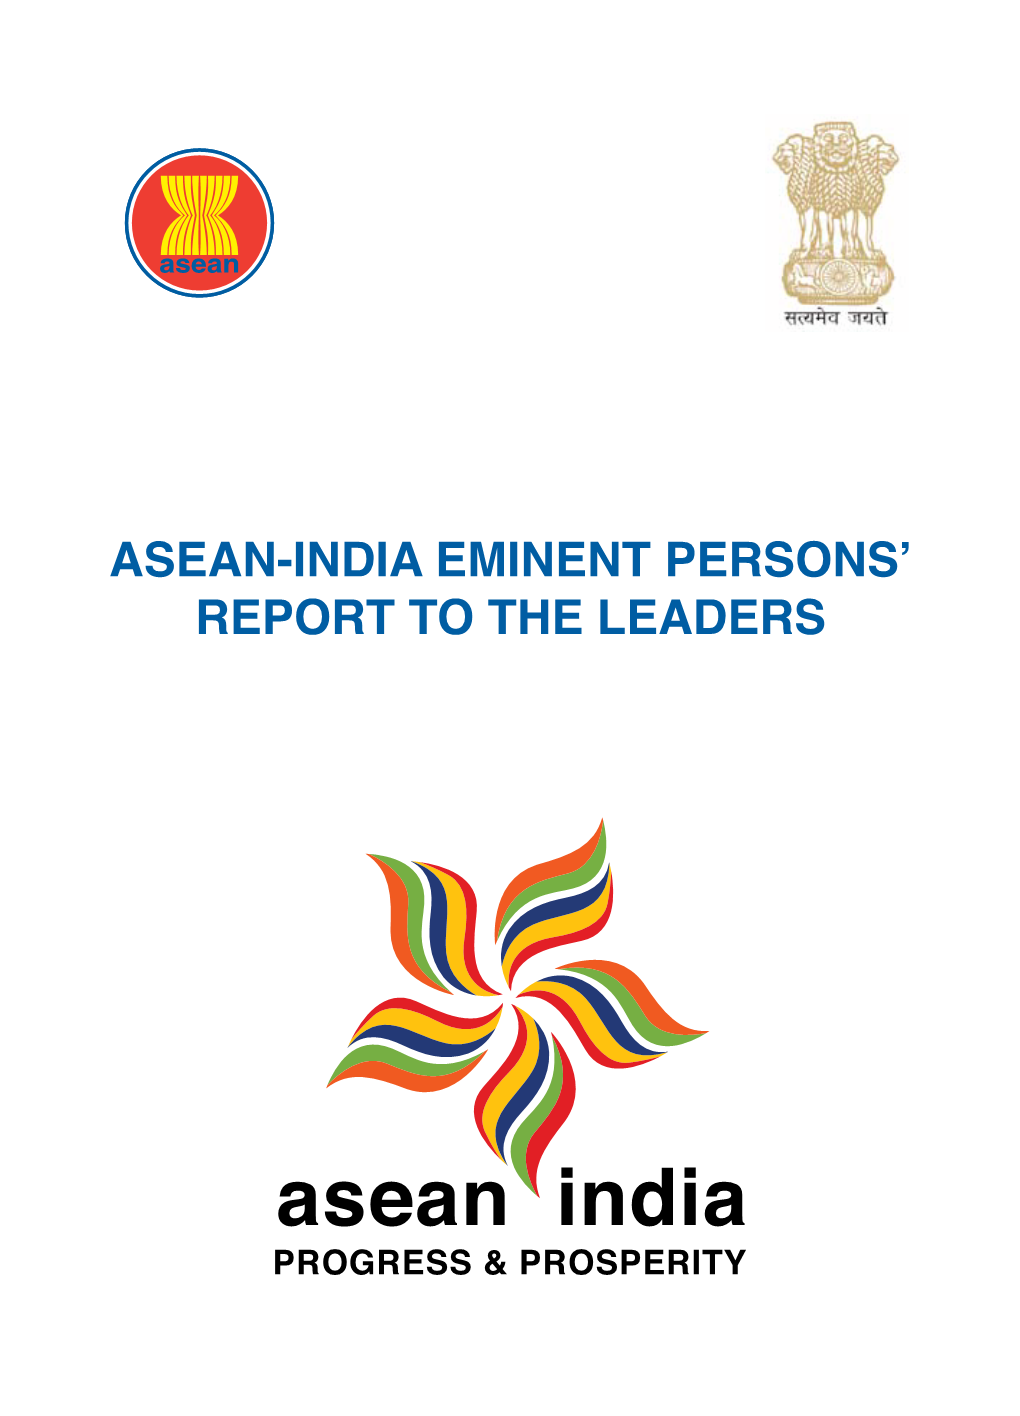 Asean-India Eminent Persons' Report to the Leaders